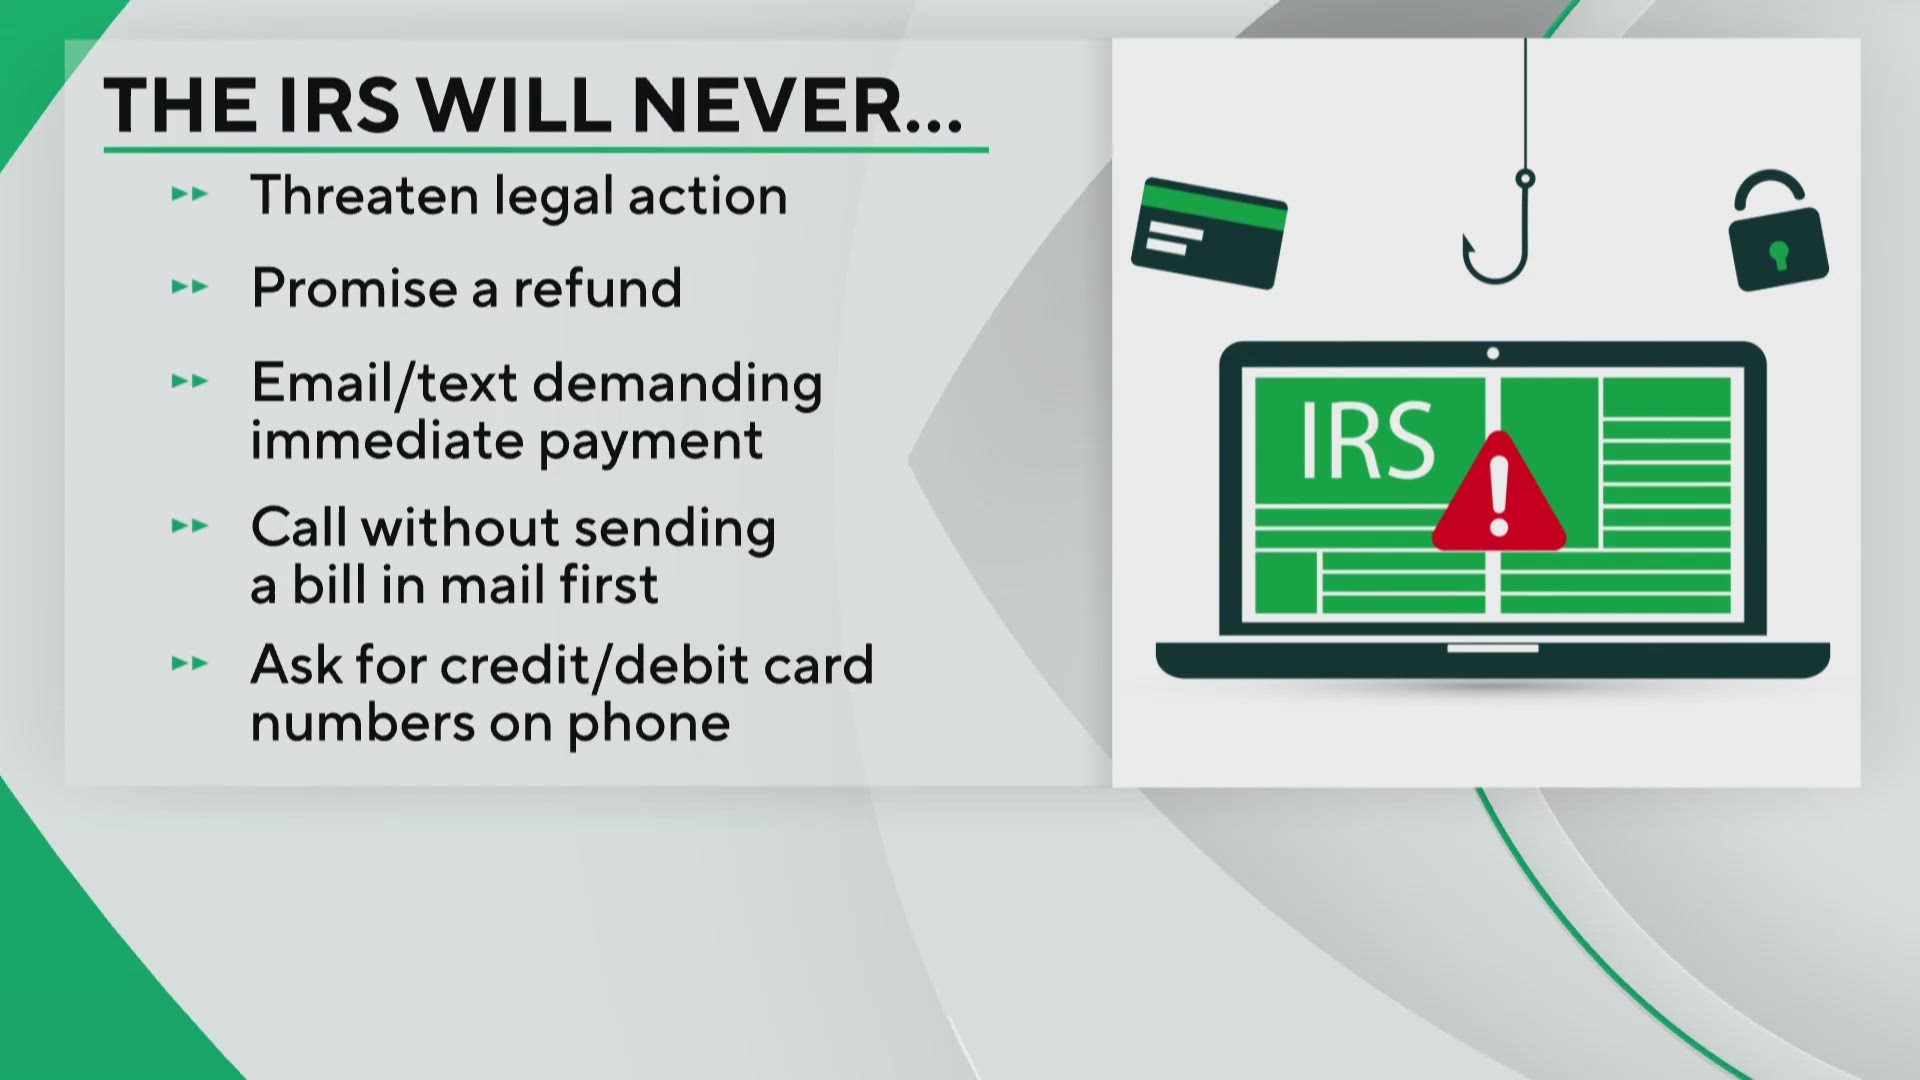 The IRS will never email, text, or call you and demand immediate payment.